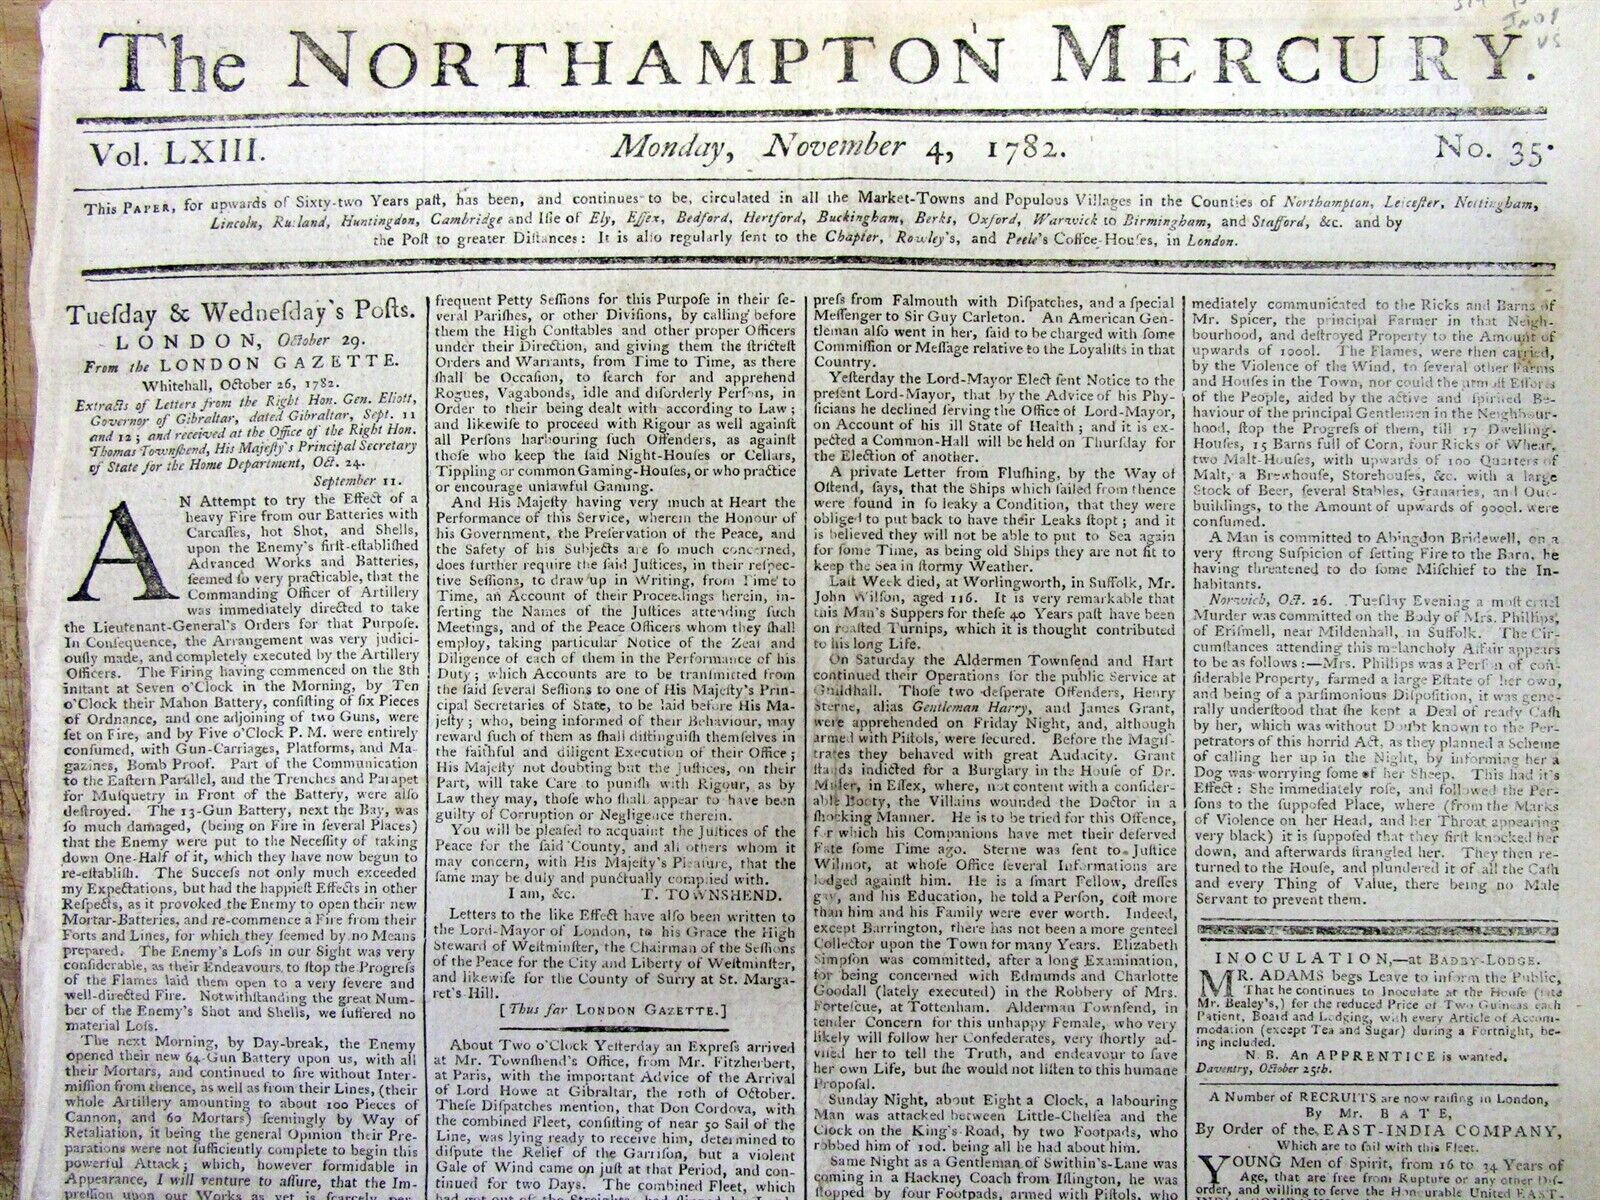 1782 newspaper EARLY REPORT of AMERICAN INDEPENDENCE after PEACE TREATY SIGNED